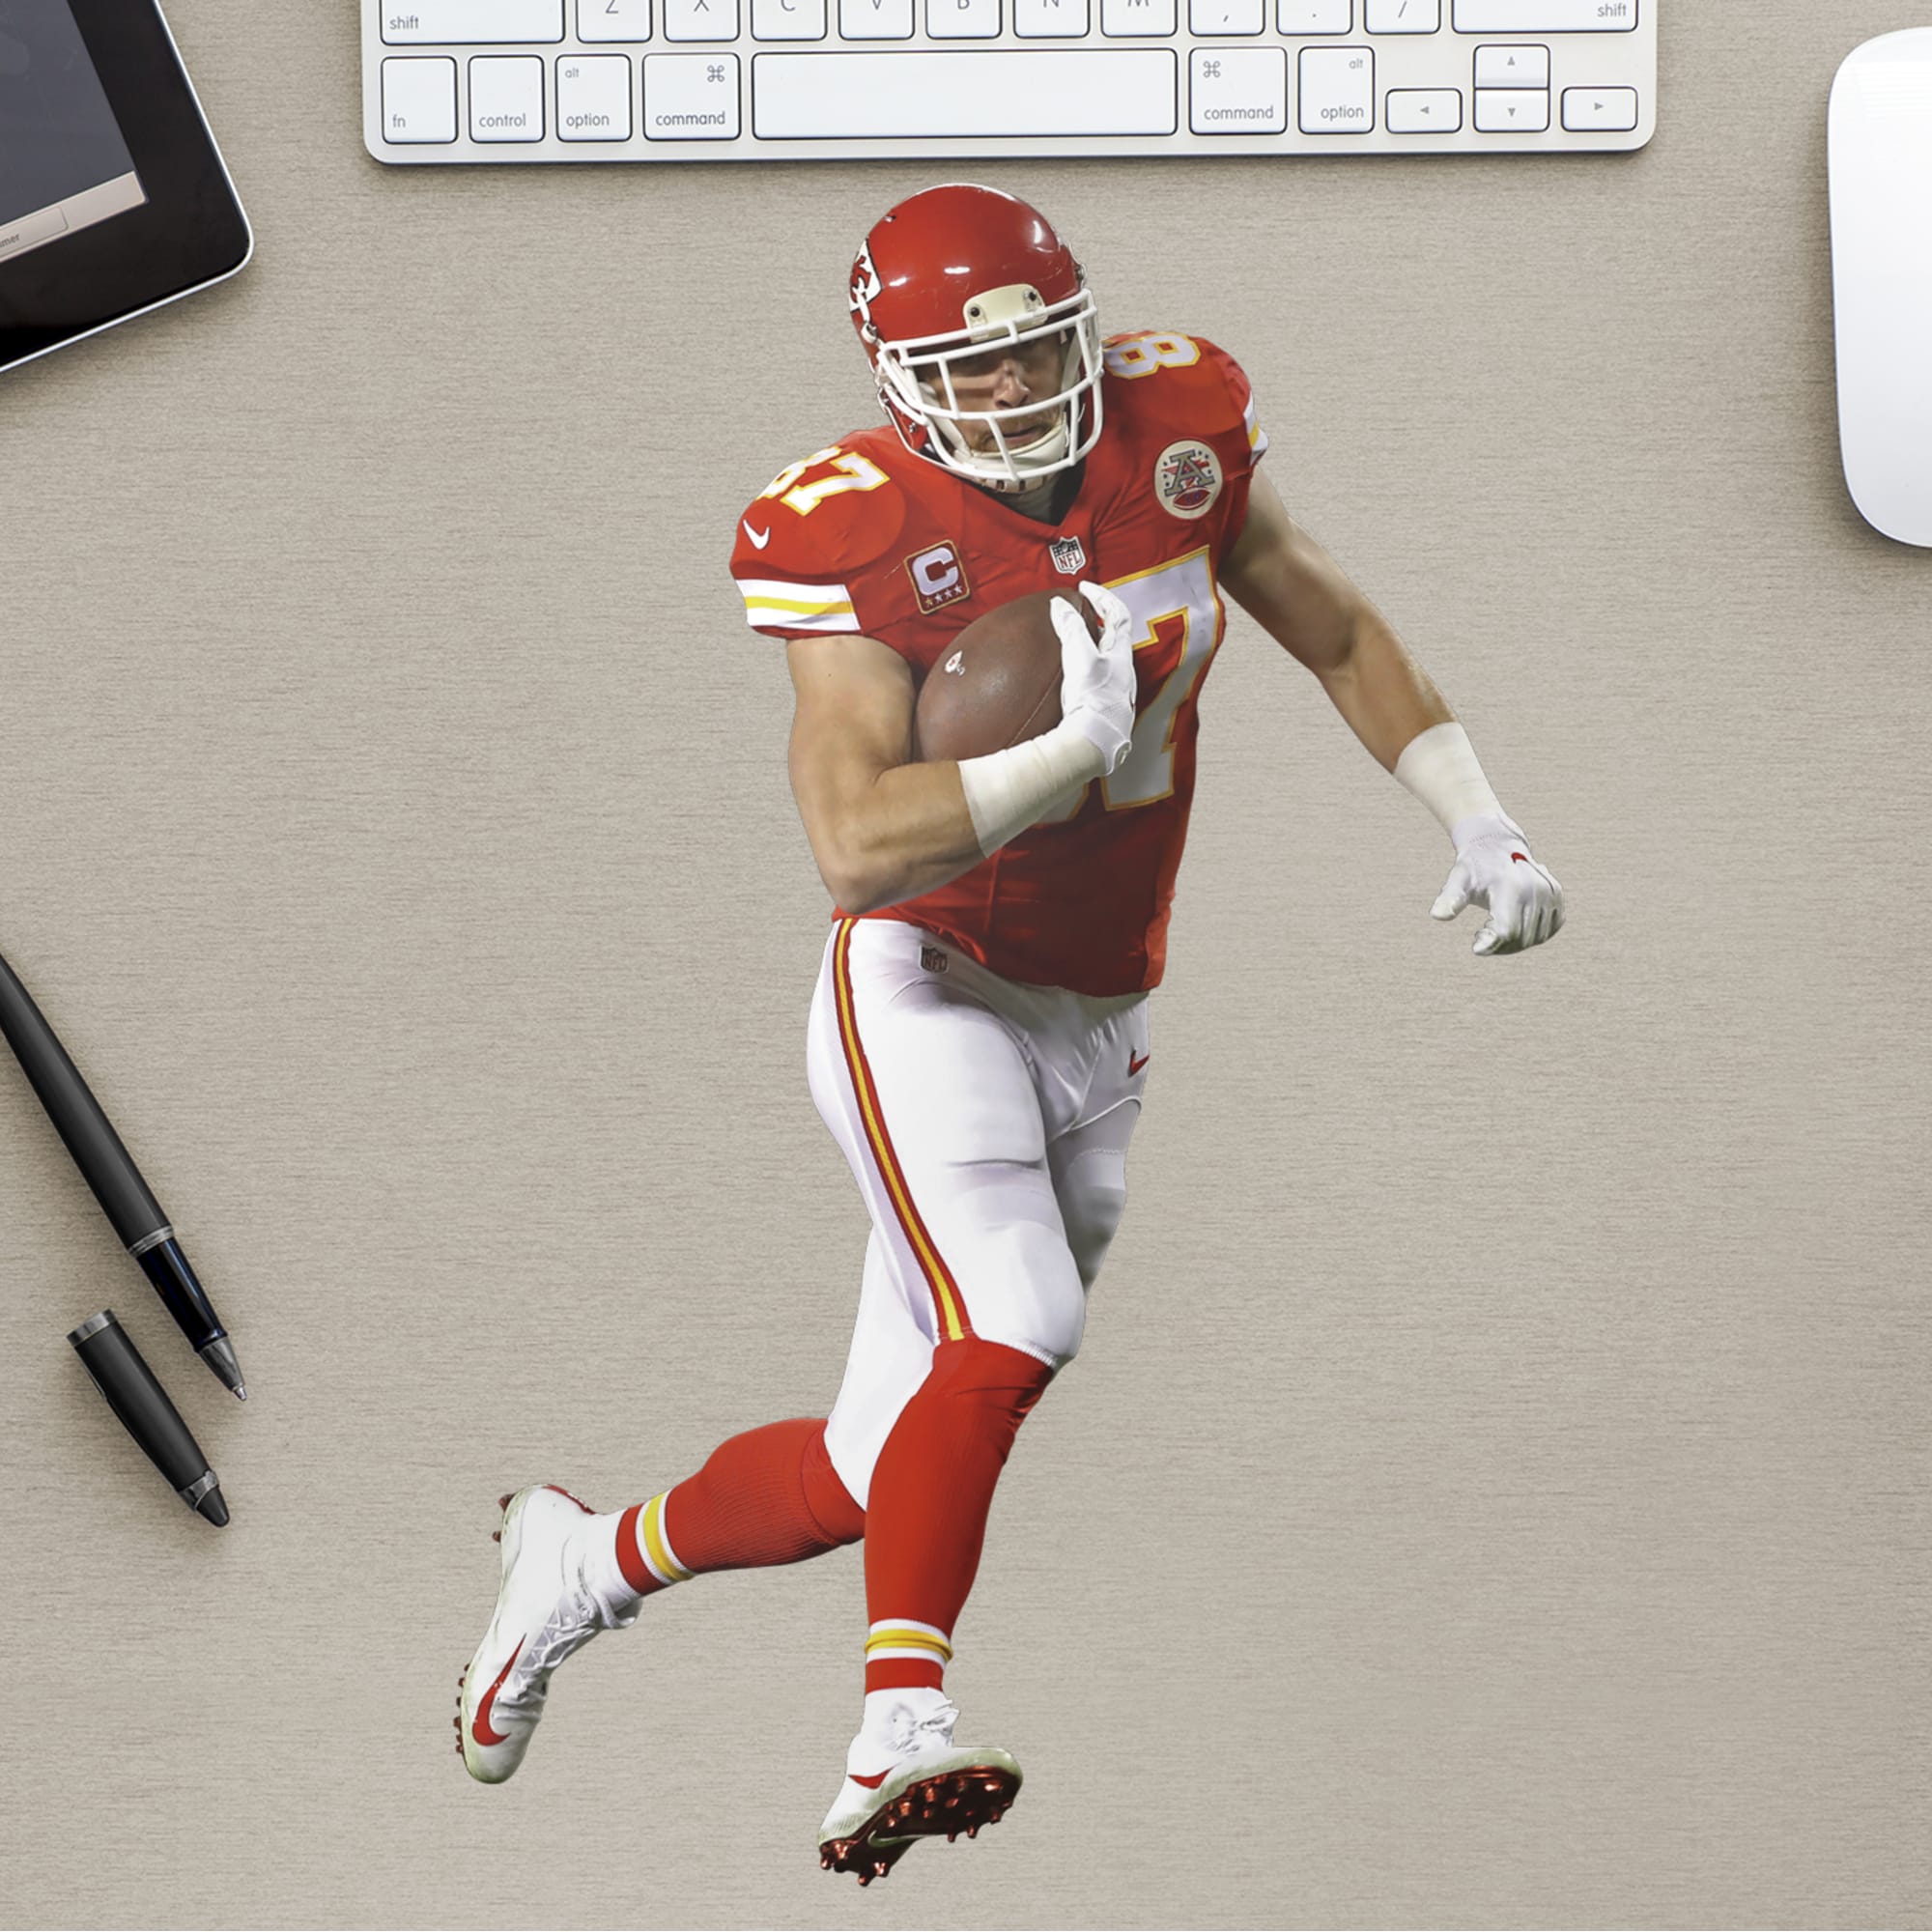 Travis Kelce for Kansas City Chiefs - Officially Licensed NFL Removable Wall Decal 11"W x 16"H by Fathead | Vinyl